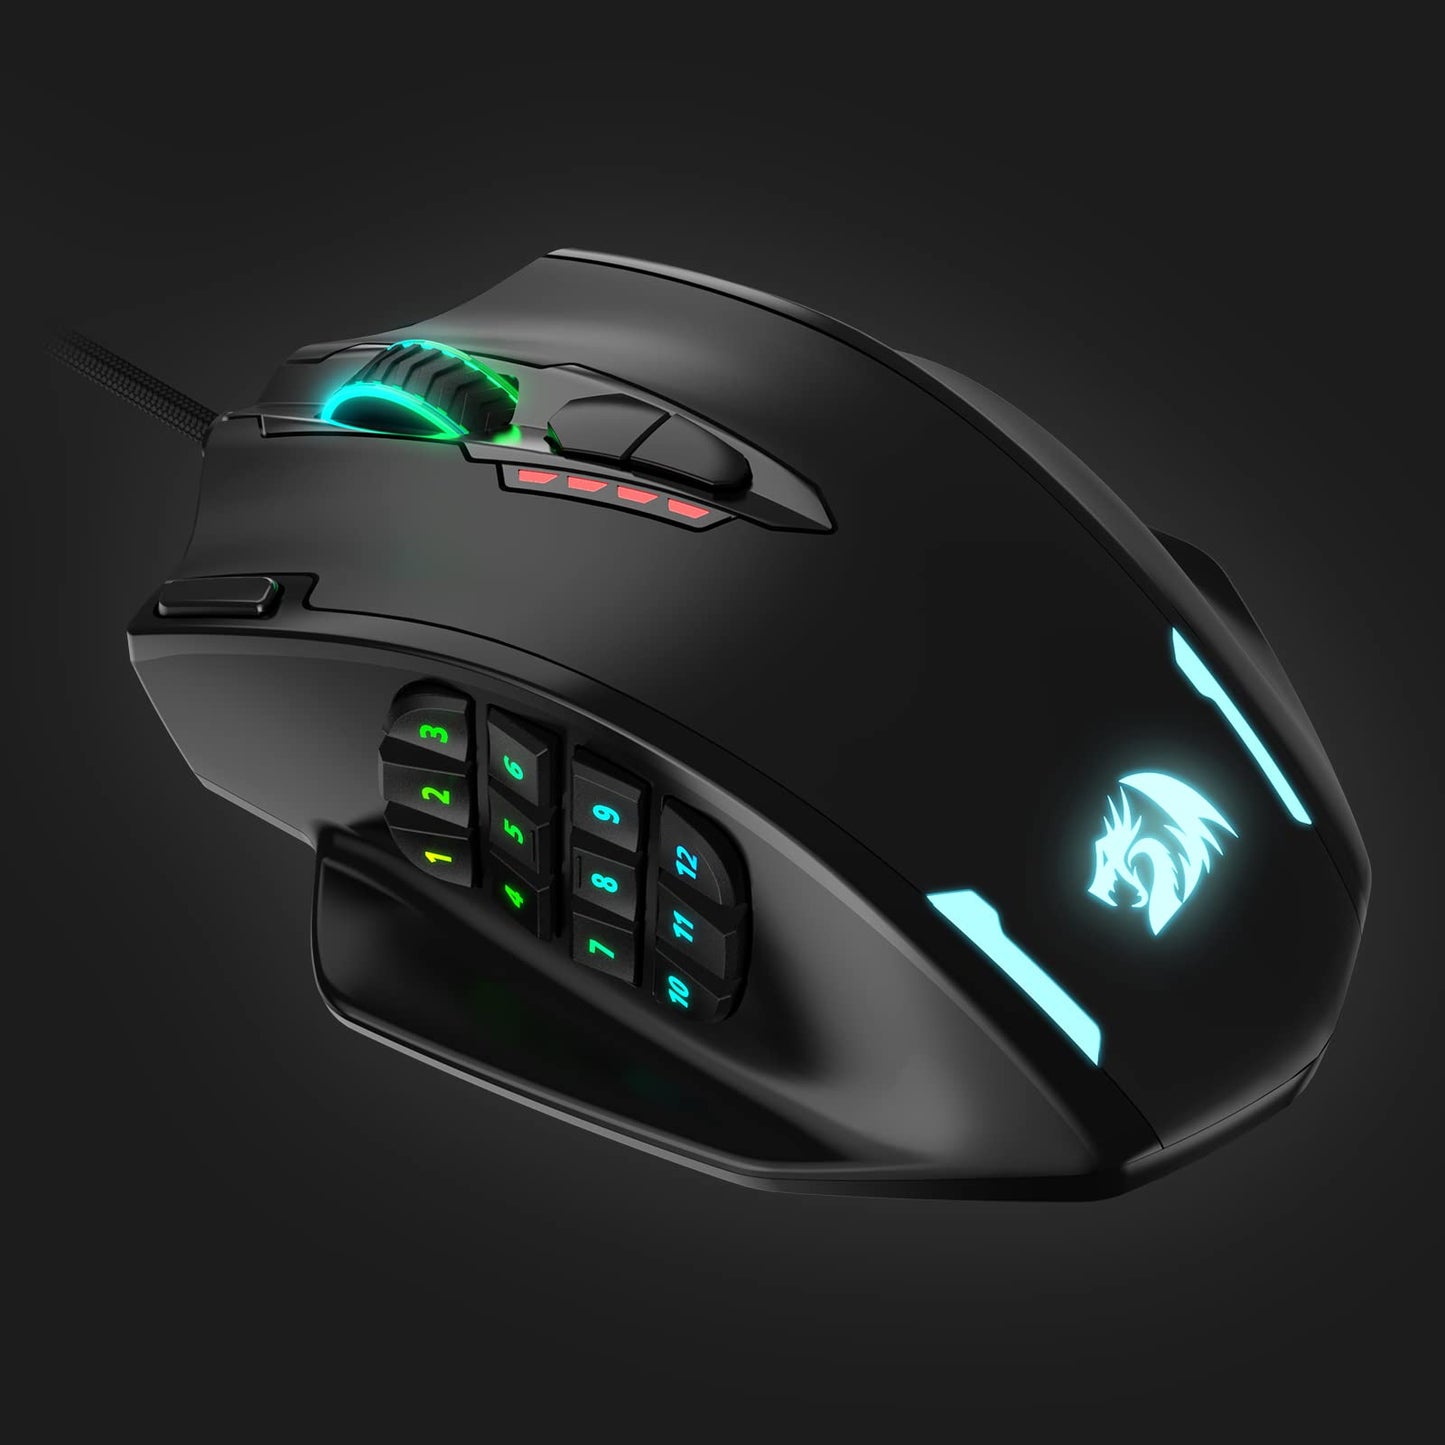 Redragon M908 Impact RGB LED MMO Gaming Mouse with 12 Side Buttons, Optical Wired Ergonomic Gamer Mouse with Max 12,400DPI, High Precision, 20 Programmable Macro Shortcuts, Comfort Grip - amzGamess